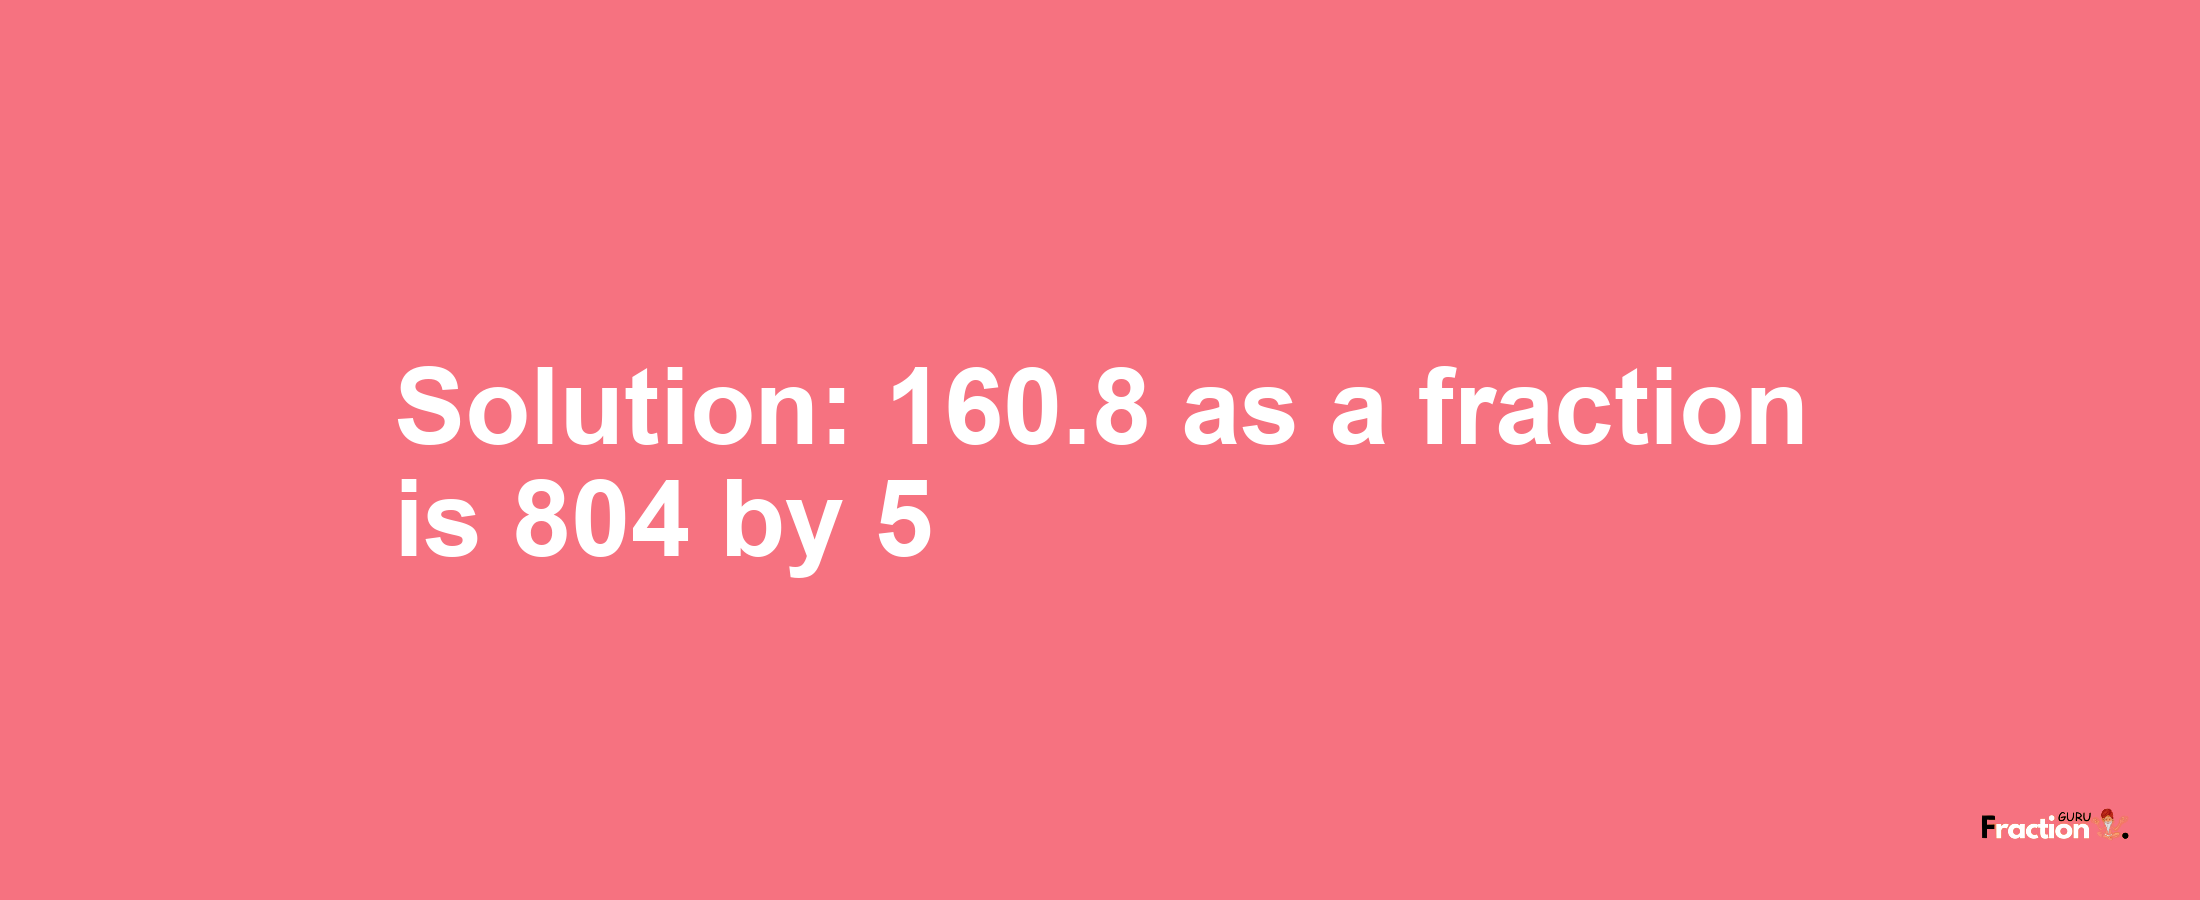 Solution:160.8 as a fraction is 804/5